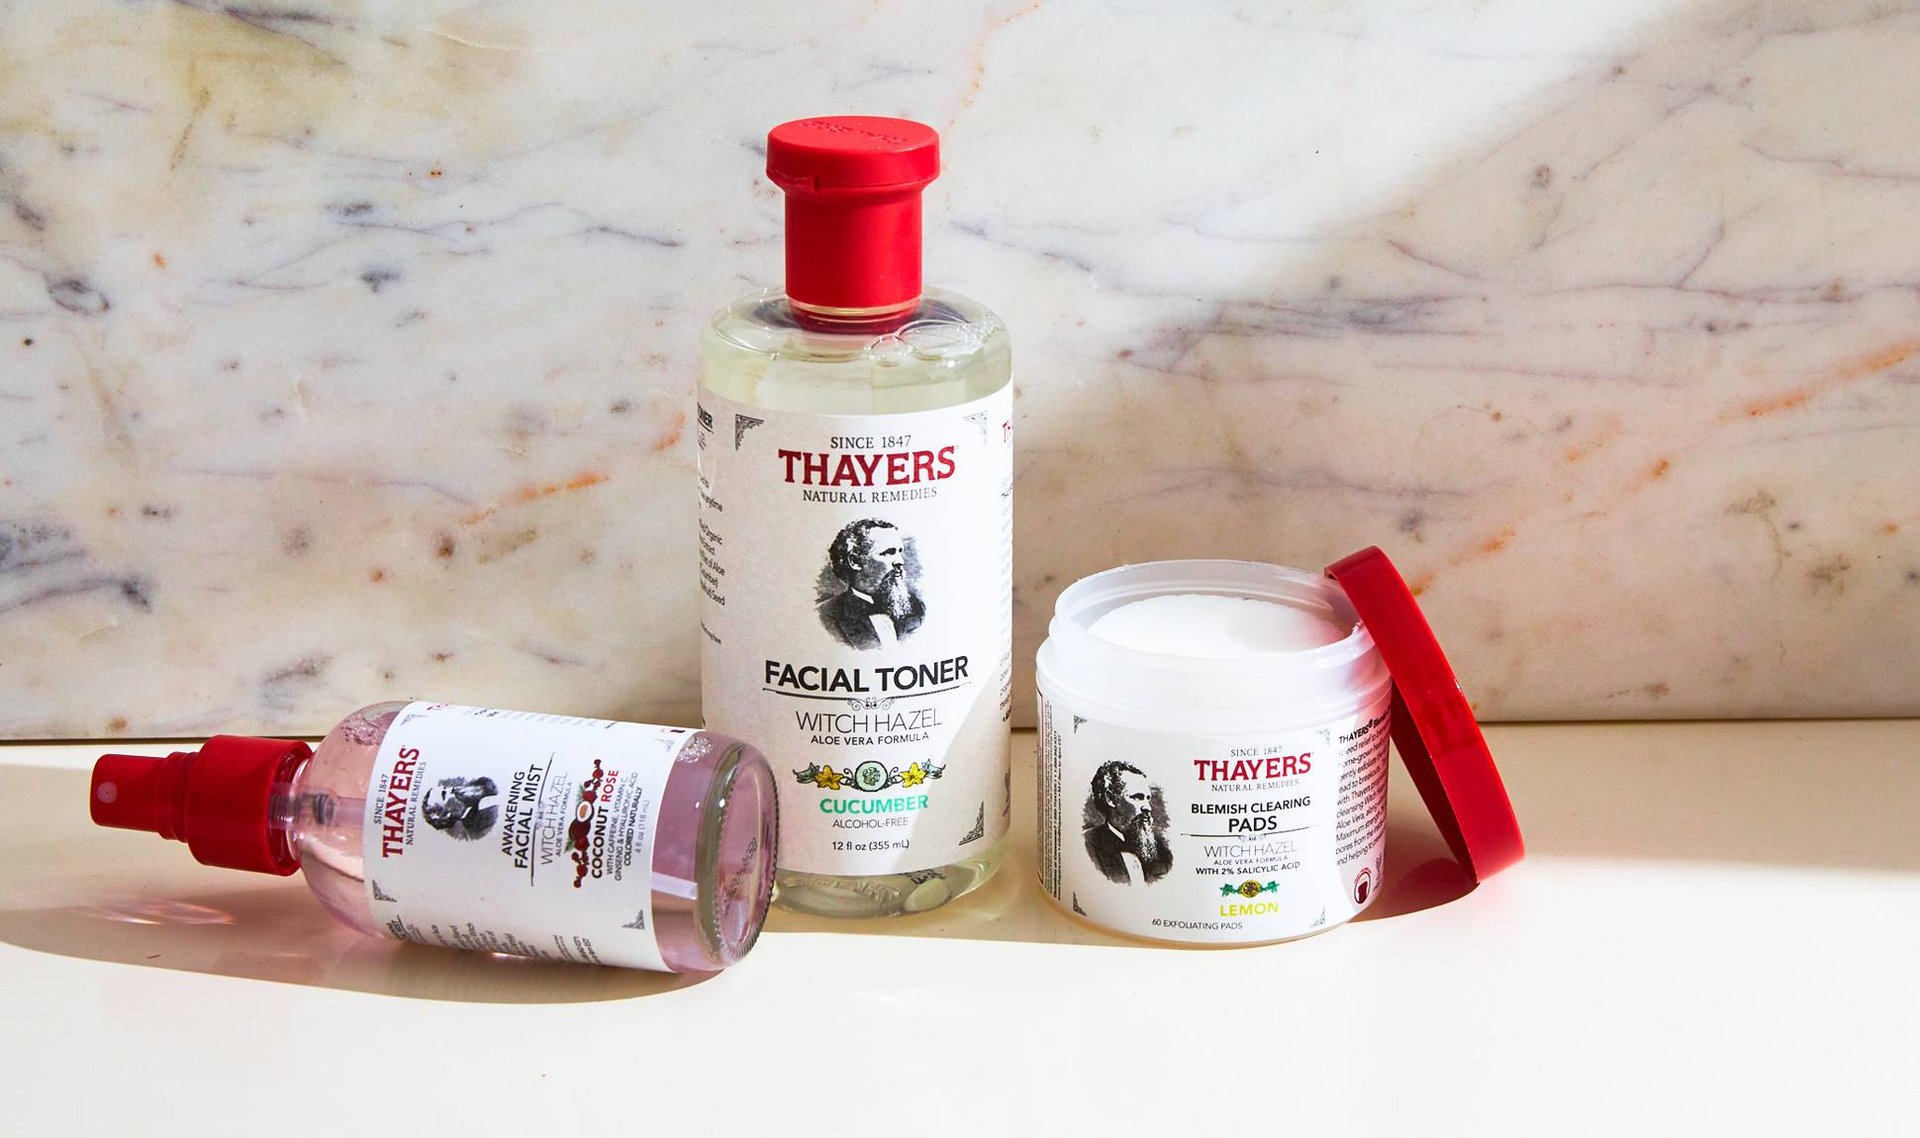 The Best Thayers Product to Use, According to Your Skin Type